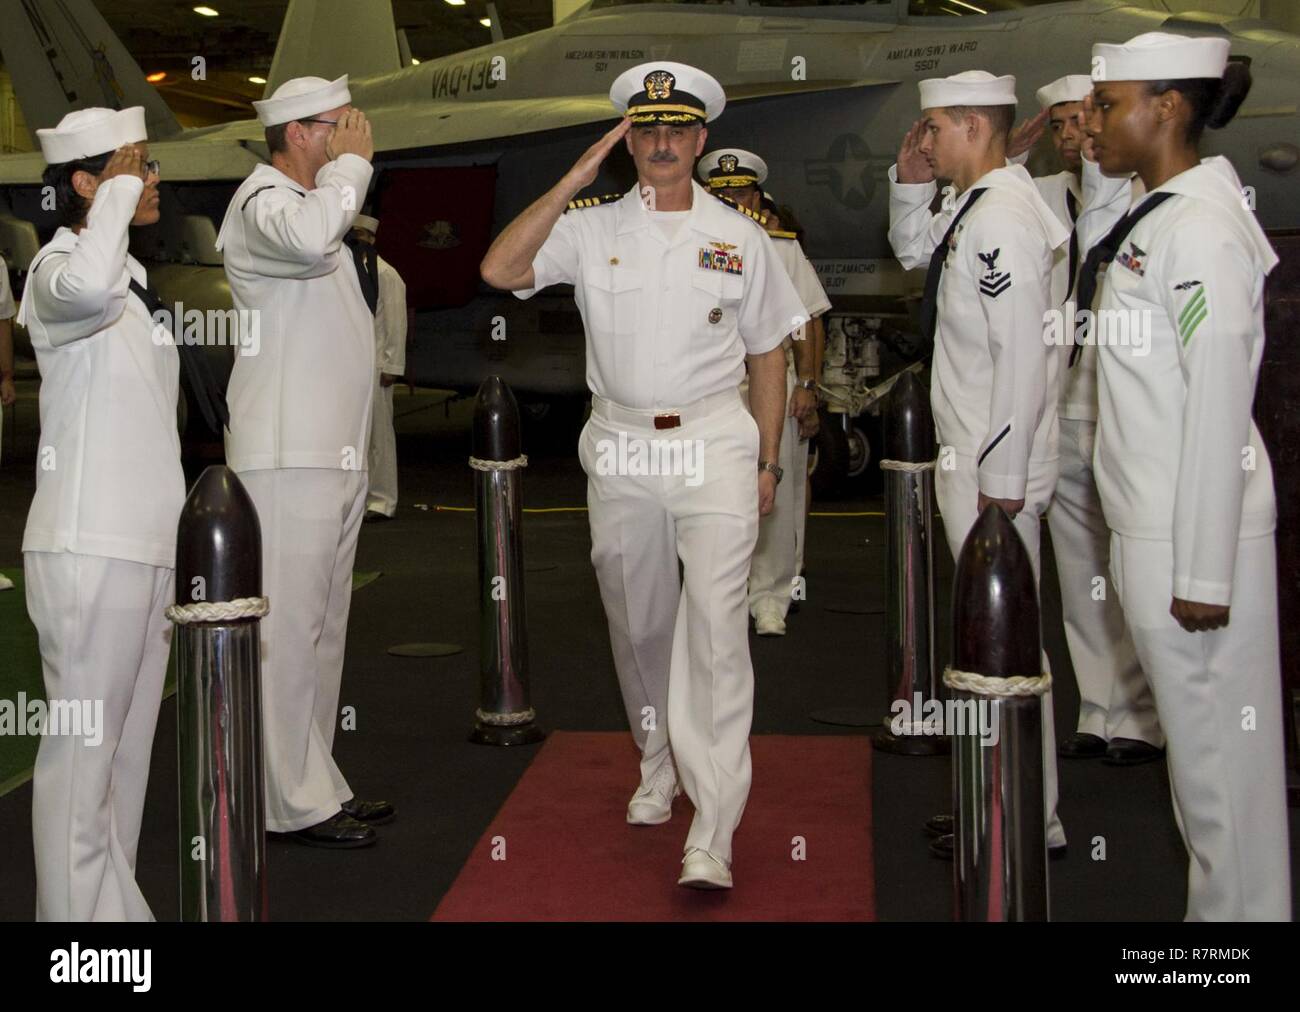 SINGAPORE (April 4, 2017)  Sideboys render honors to Capt. Doug Verissimo, commanding officer of the aircraft carrier USS Carl Vinson (CVN 70), during a reception in the ship’s hangar bay. Carl Vinson and it's carrier strike group are on a western Pacific deployment as part of the U.S. Pacific Fleet-led initiative to extend the command and control functions of U.S. 3rd Fleet. Stock Photo